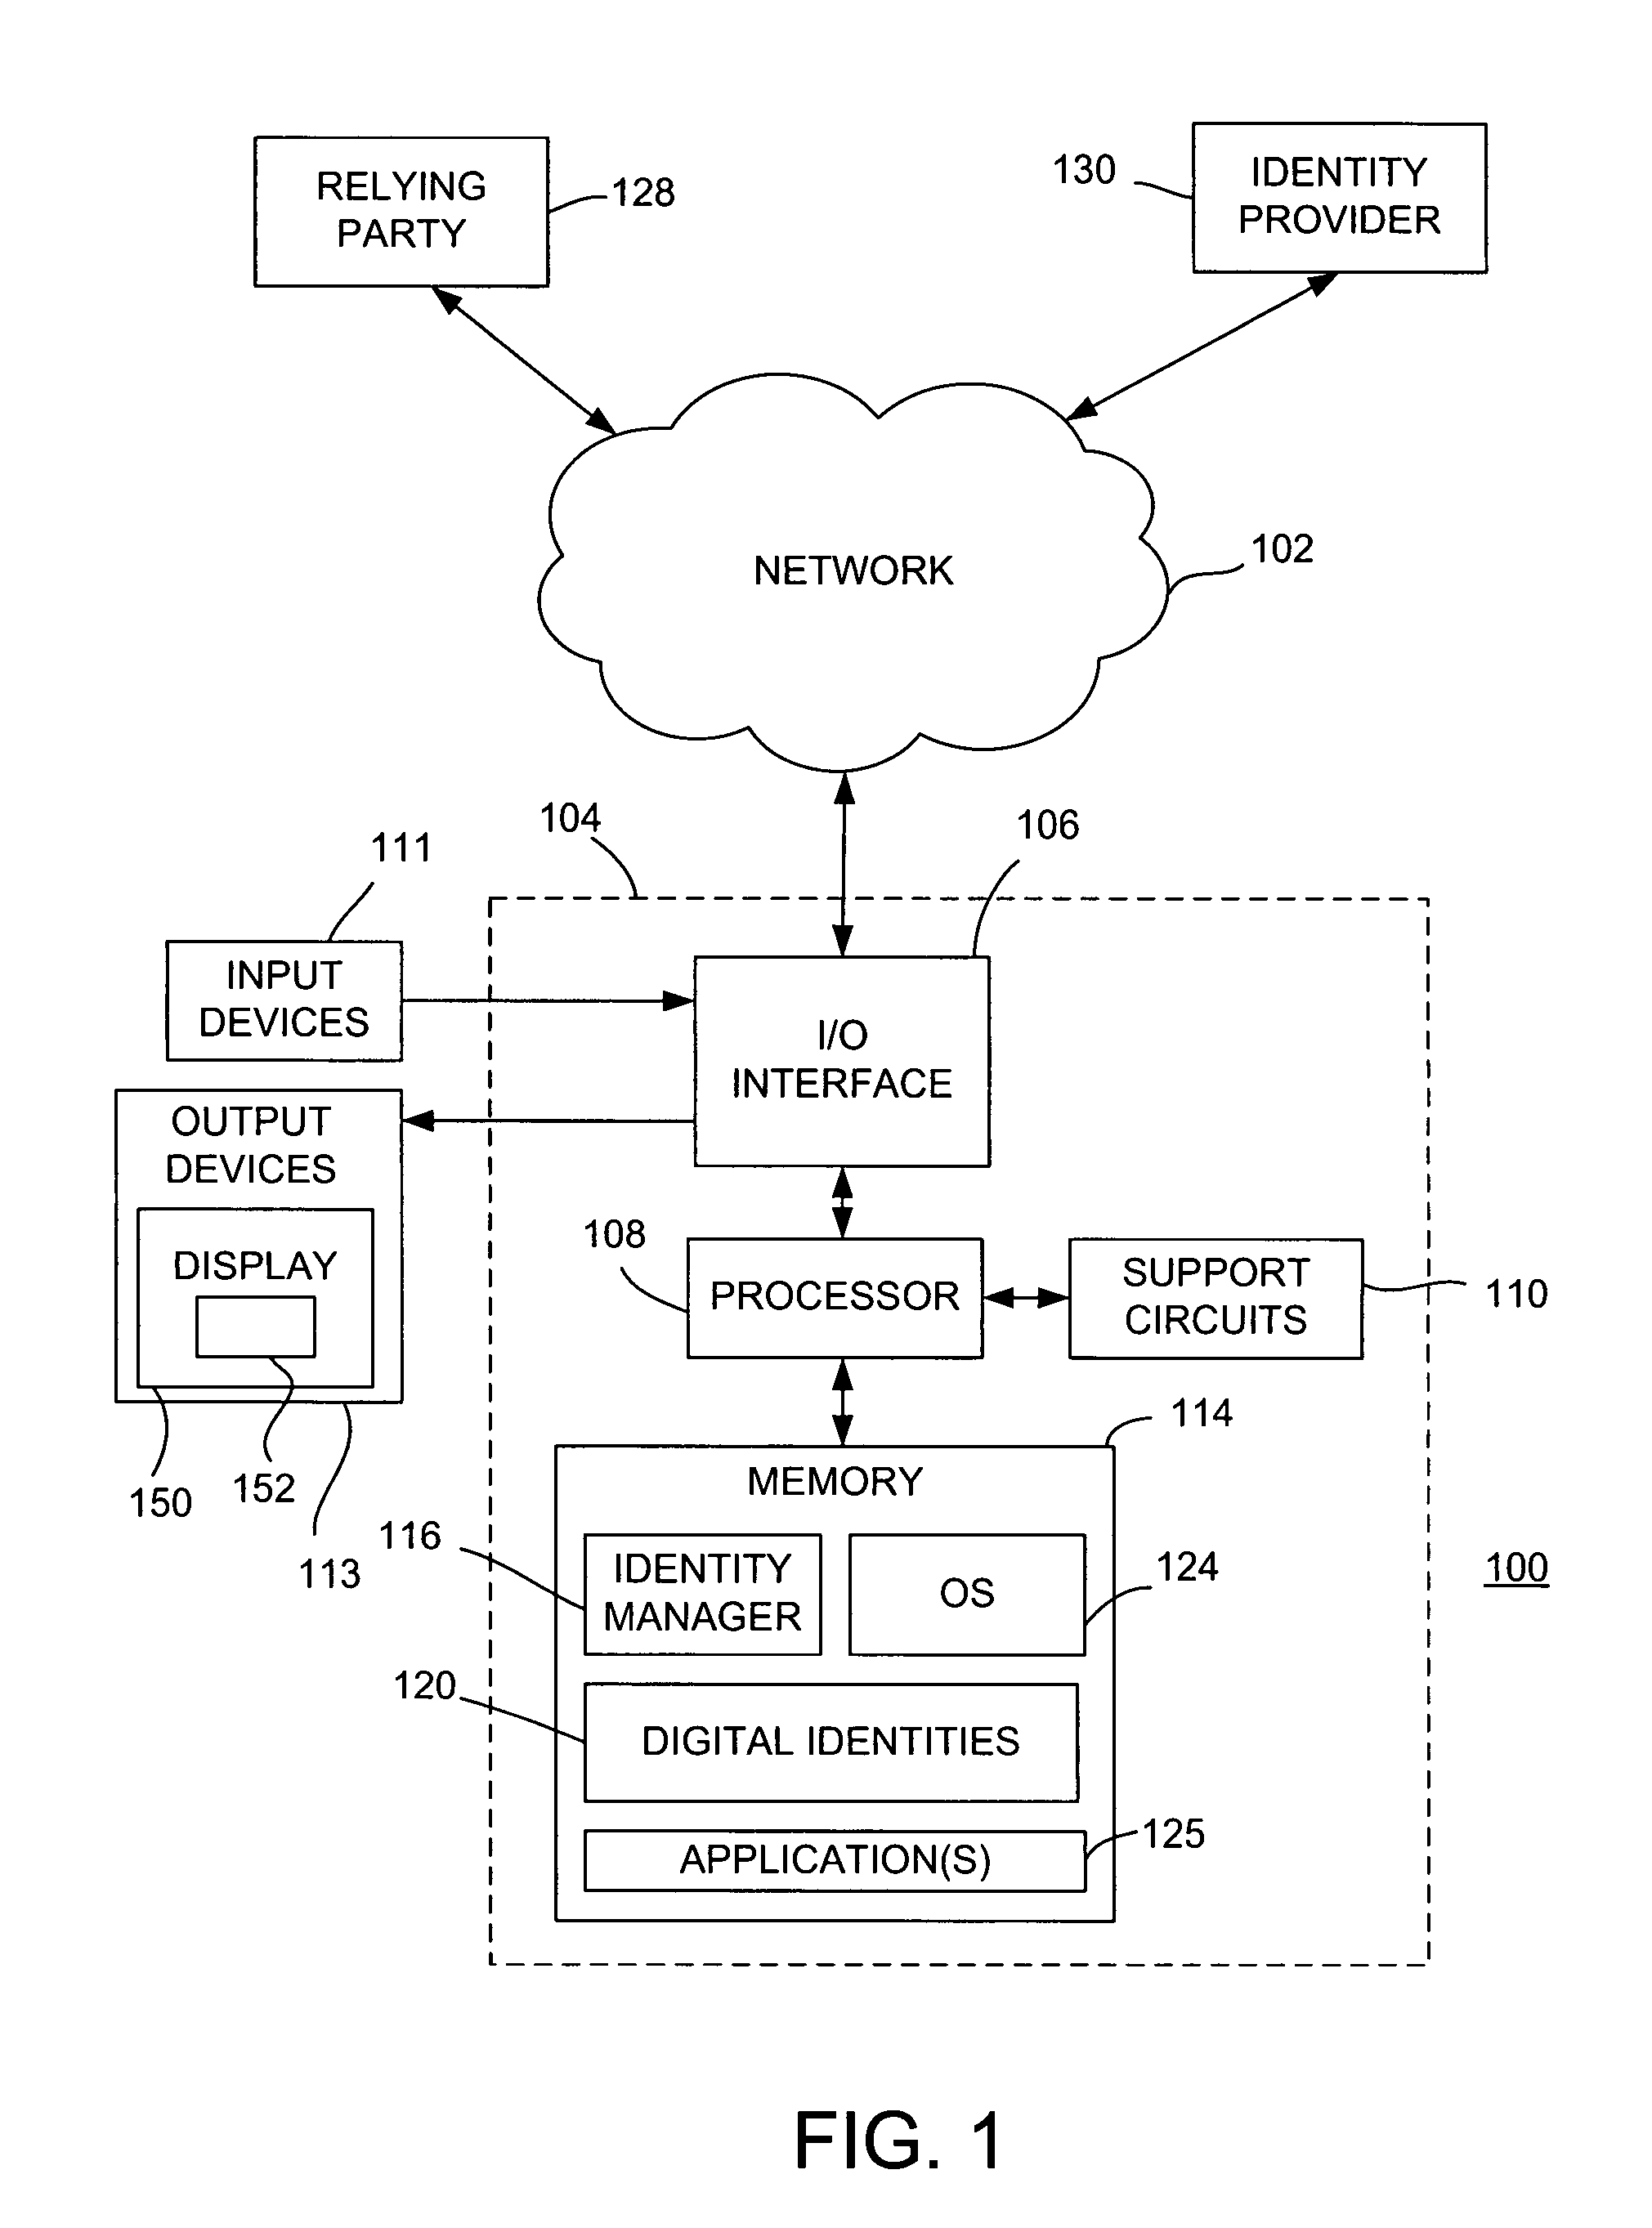 Method and apparatus for managing digital identities through a single interface